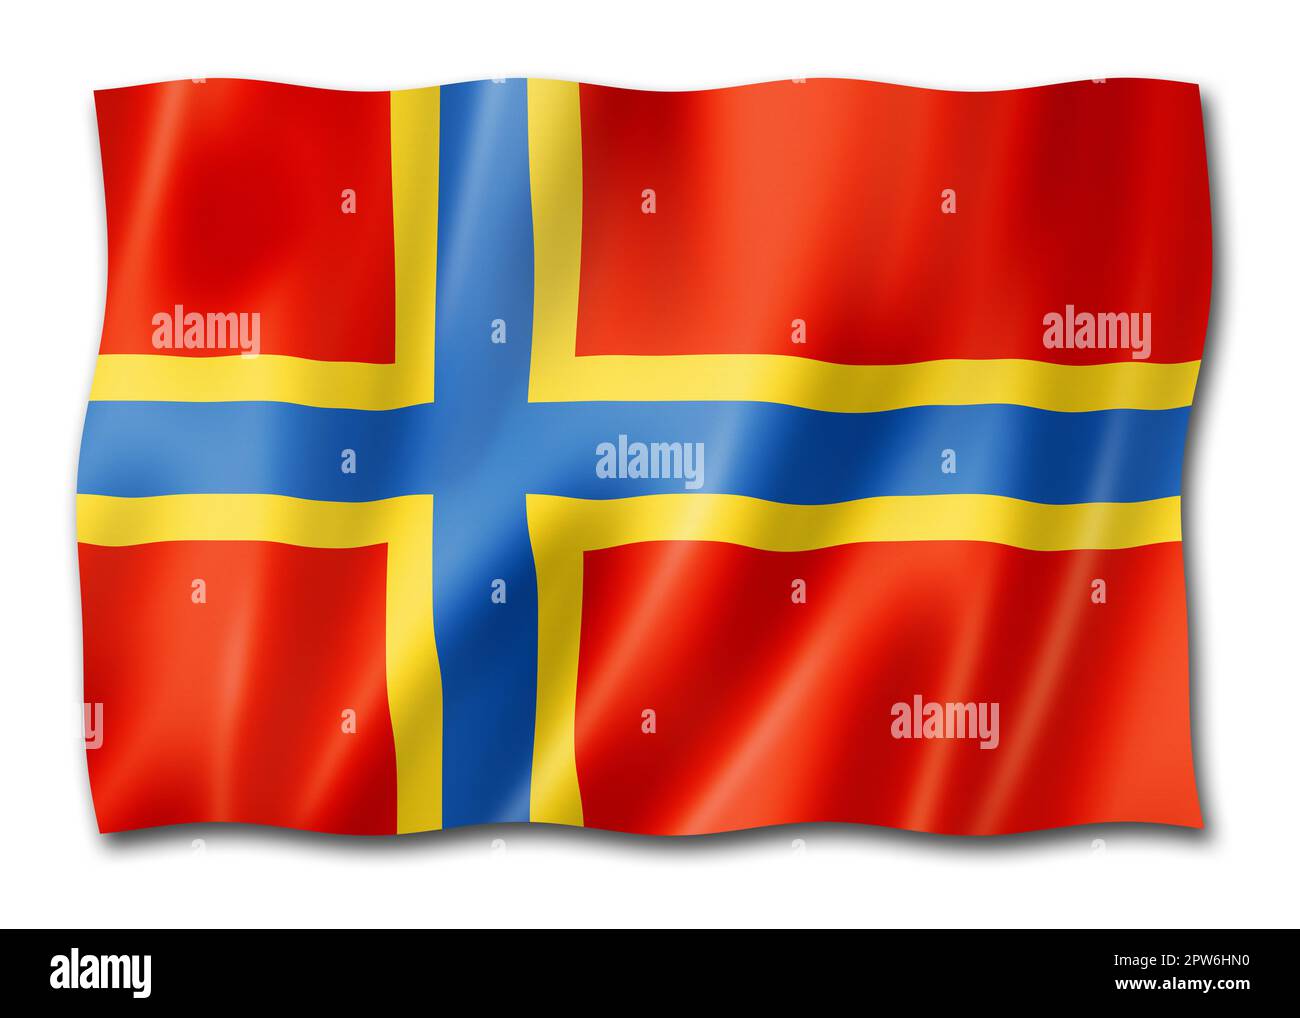 Orkney County flag, United Kingdom waving banner collection. 3D illustration Stock Photo